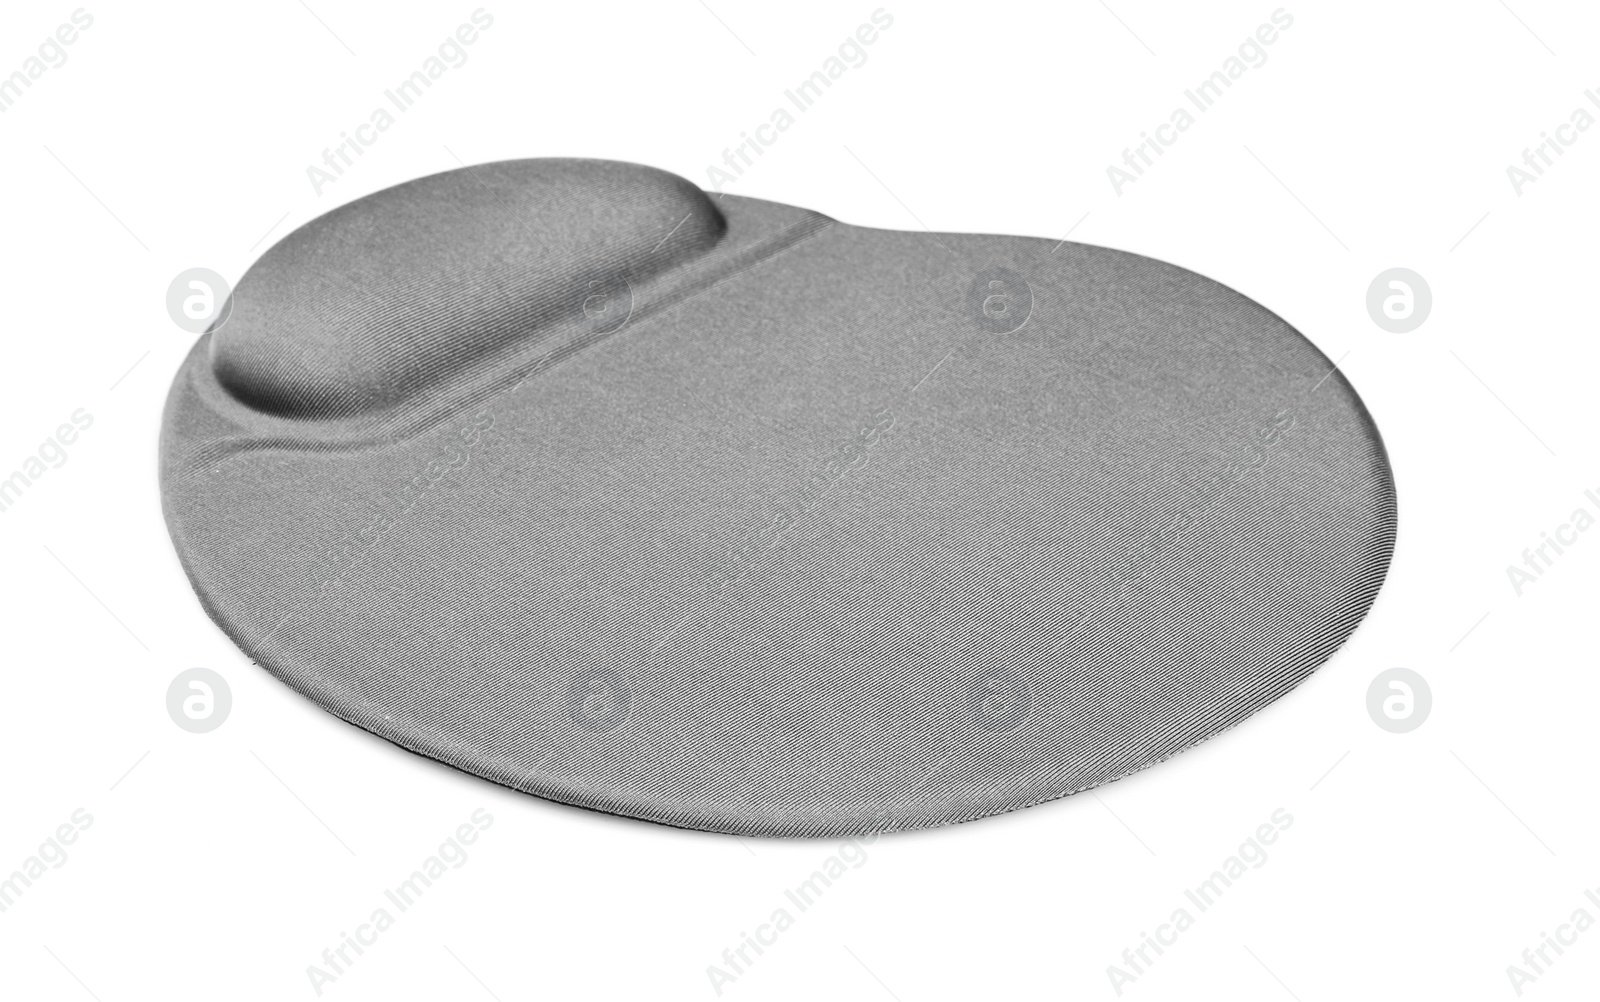 Photo of Mouse pad on white background